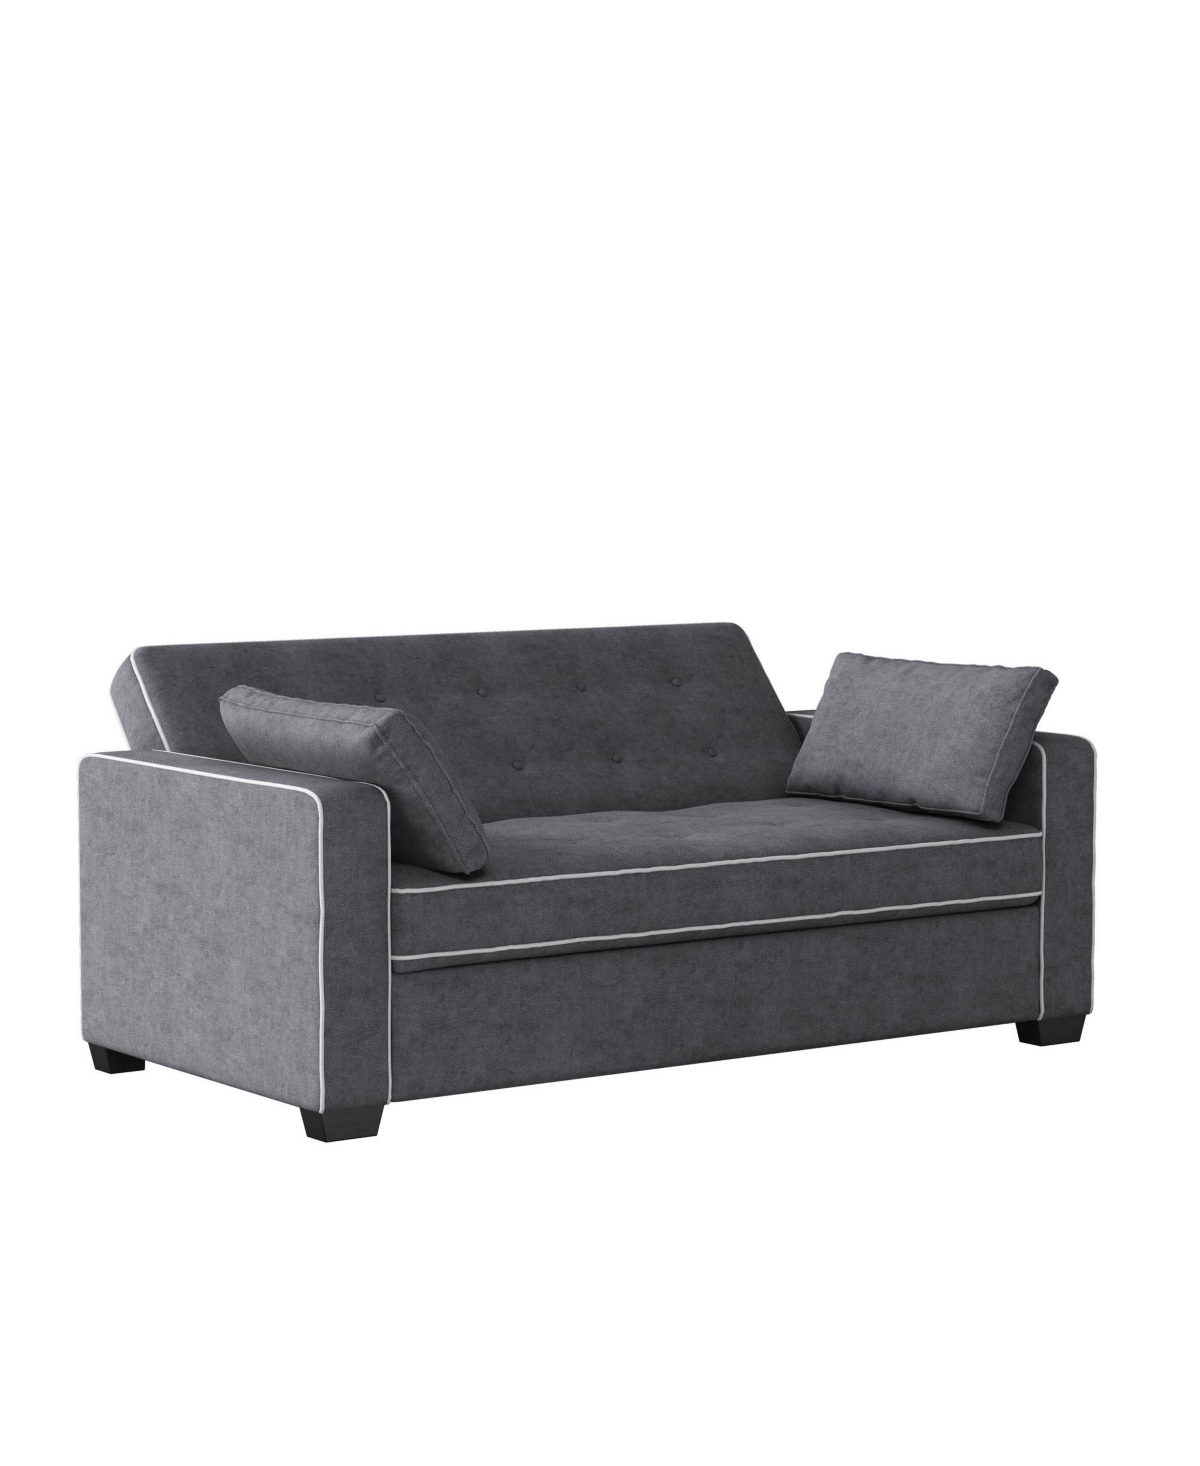 Serta Augustus Queen Size Convertible Sofa In Charcoal